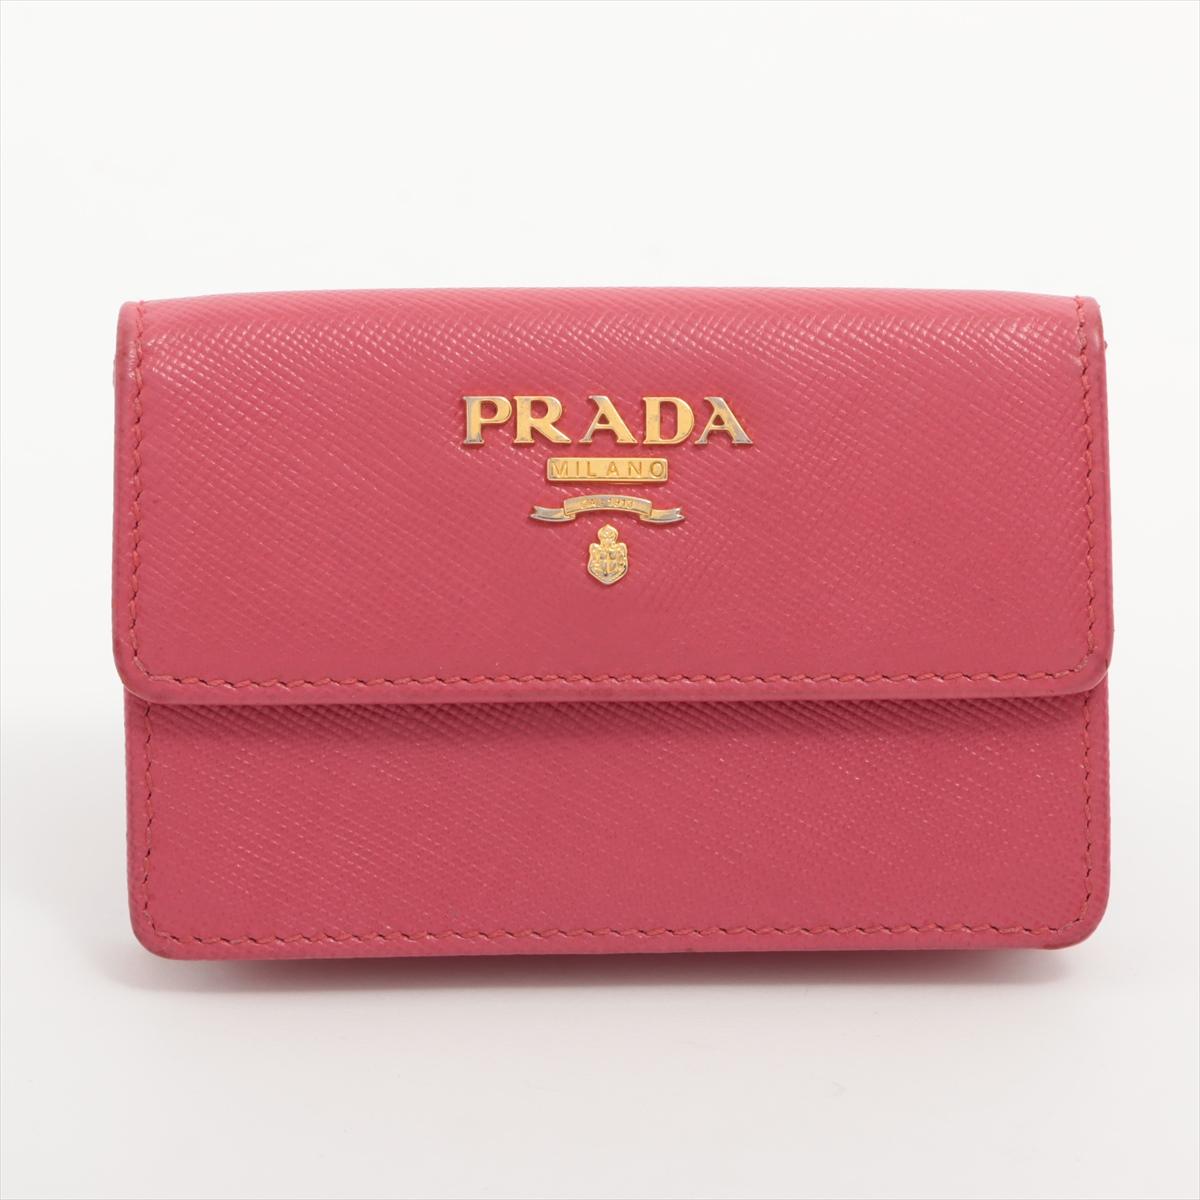 The Prada Saffiano Leather Card Case in Pink is a sleek and sophisticated accessory, perfect for keeping your essentials organized in style. Crafted from luxurious Saffiano leather, known for its durability and distinctive crosshatch texture, the